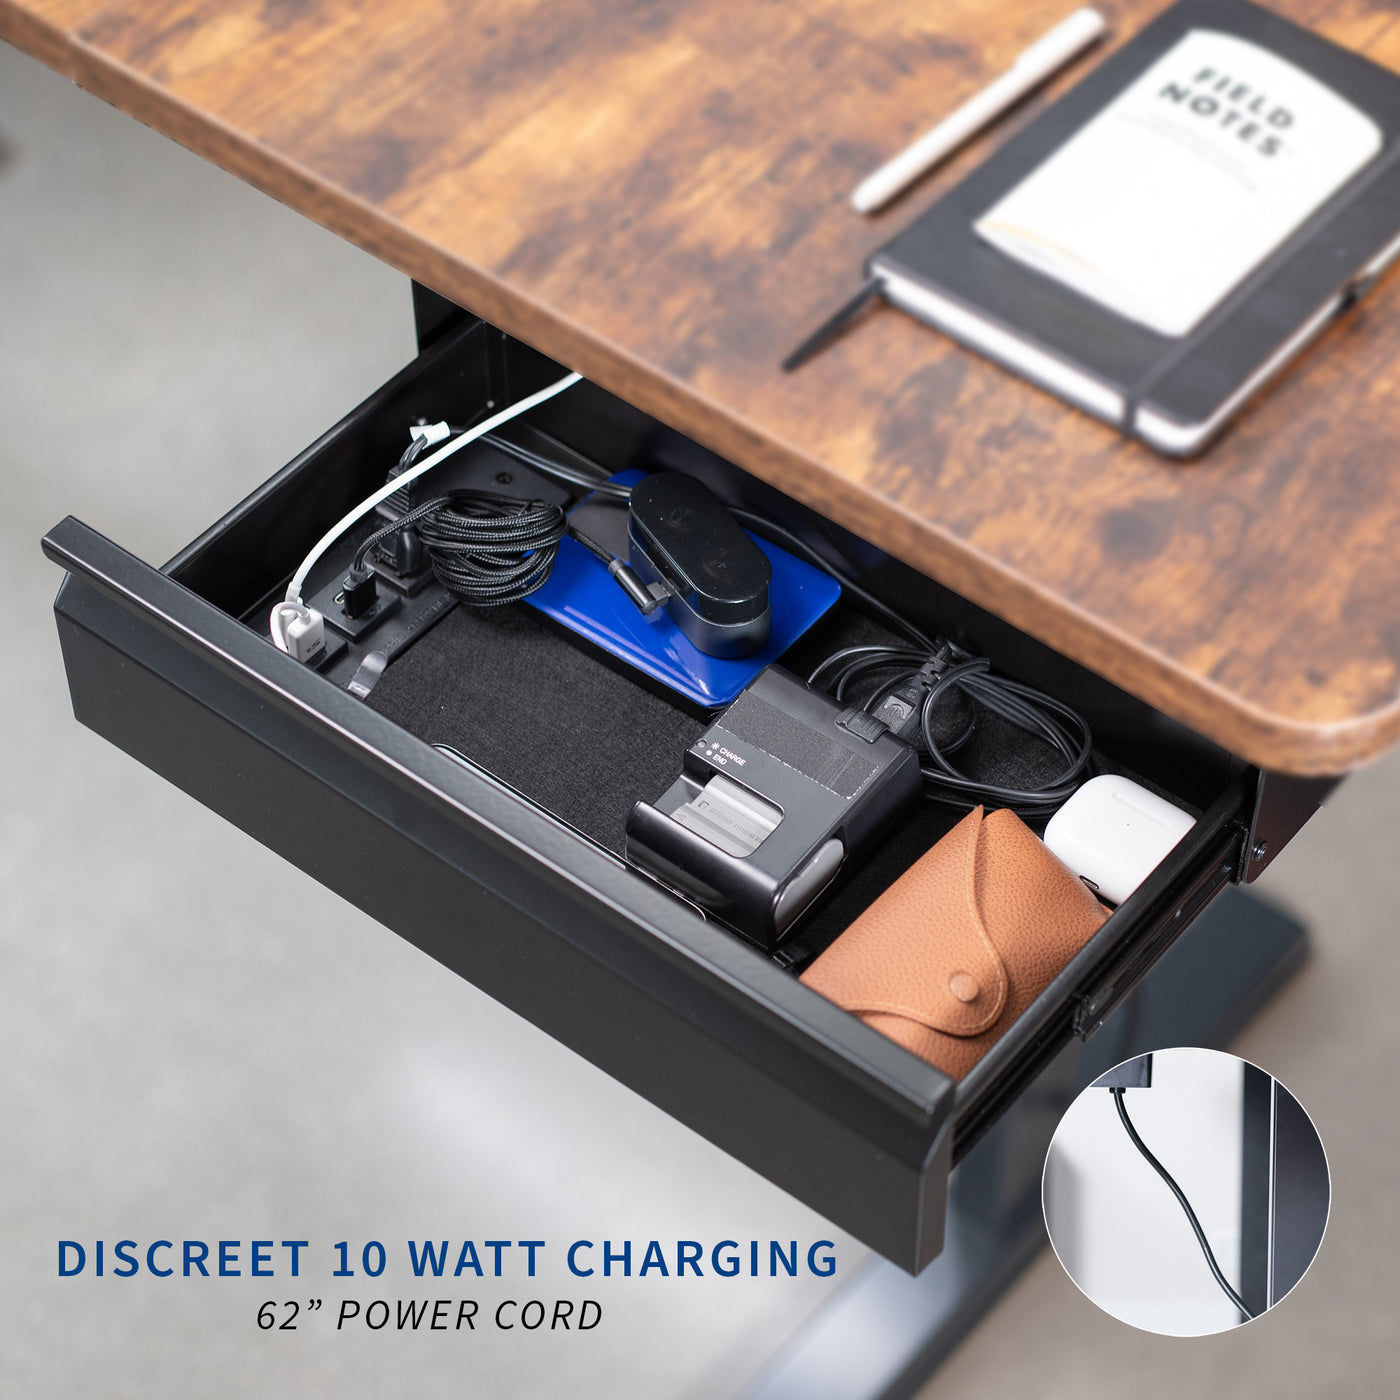 Durable versatile pullout under desk organizer drawer for extra storage with built-in power strip.